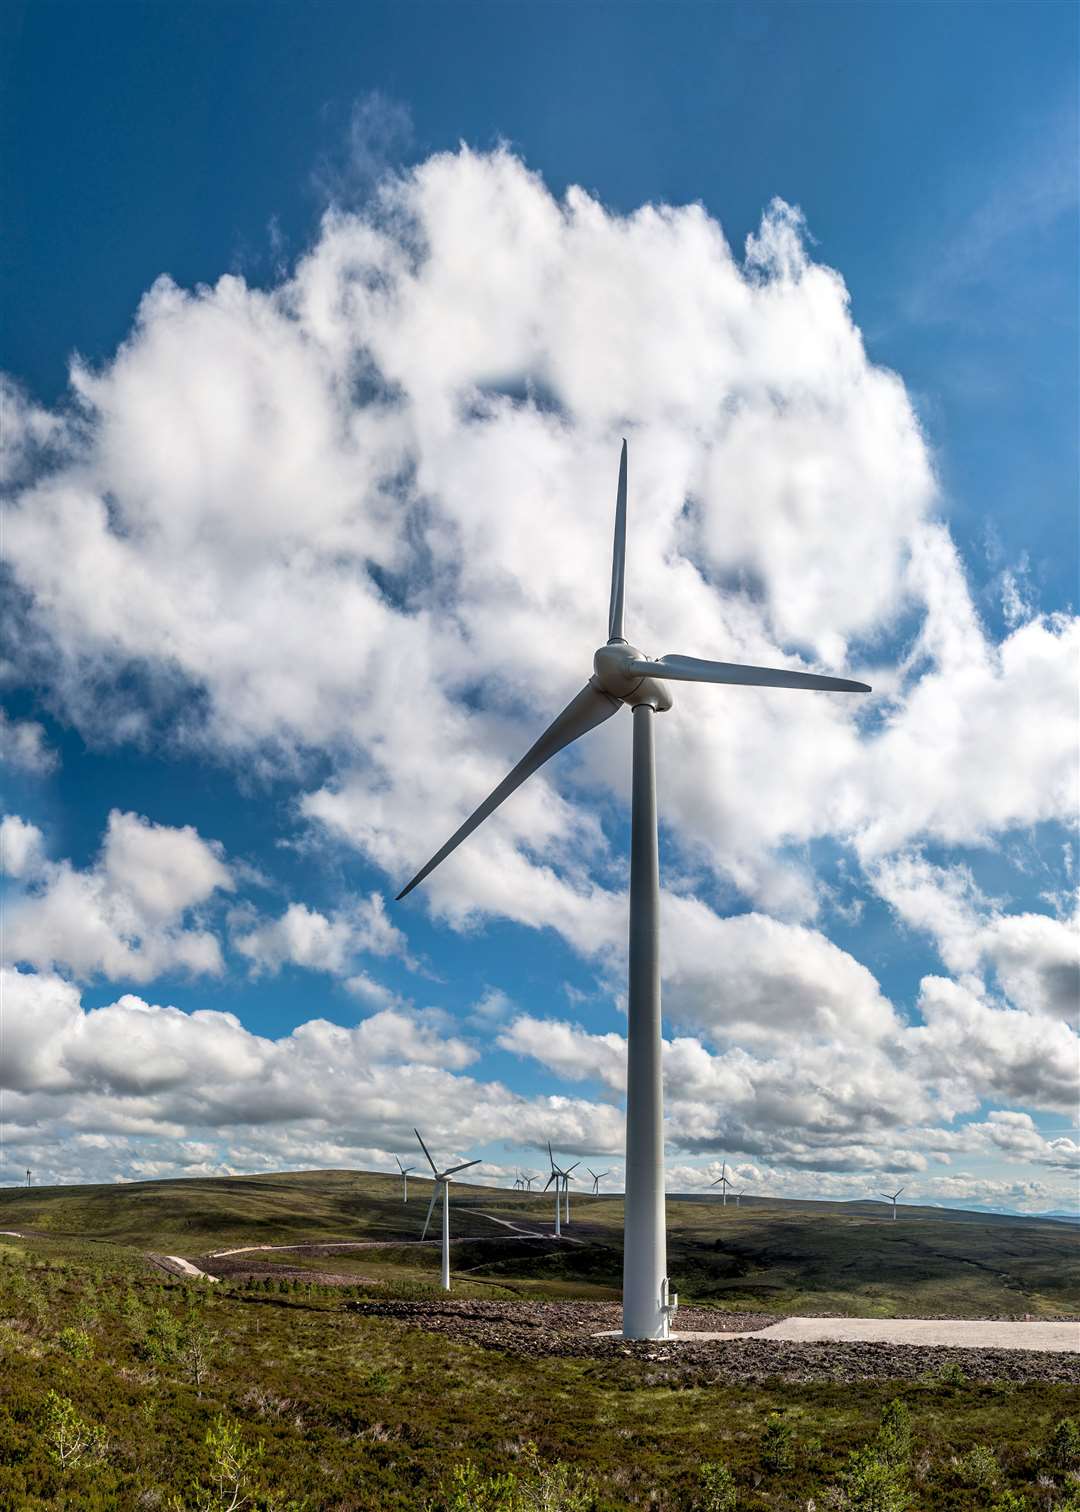 Berry Burn wind farm continues to generate funds for community projects.